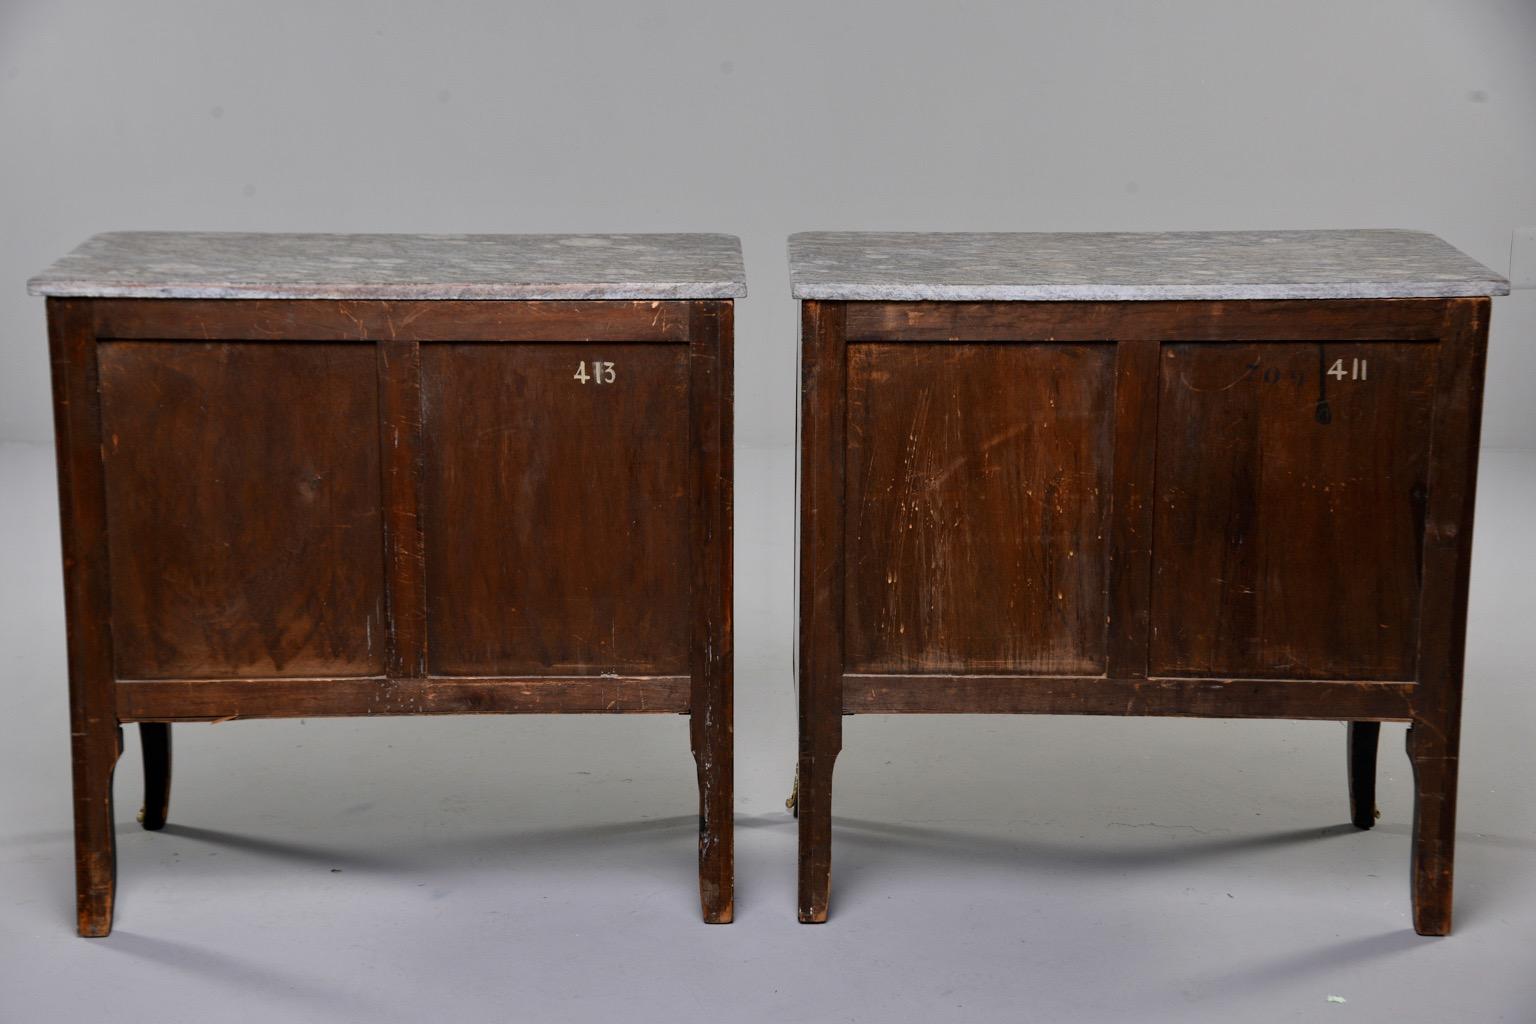 20th Century Pair of Louis XVI Style Mahogany Chests with Marble Tops